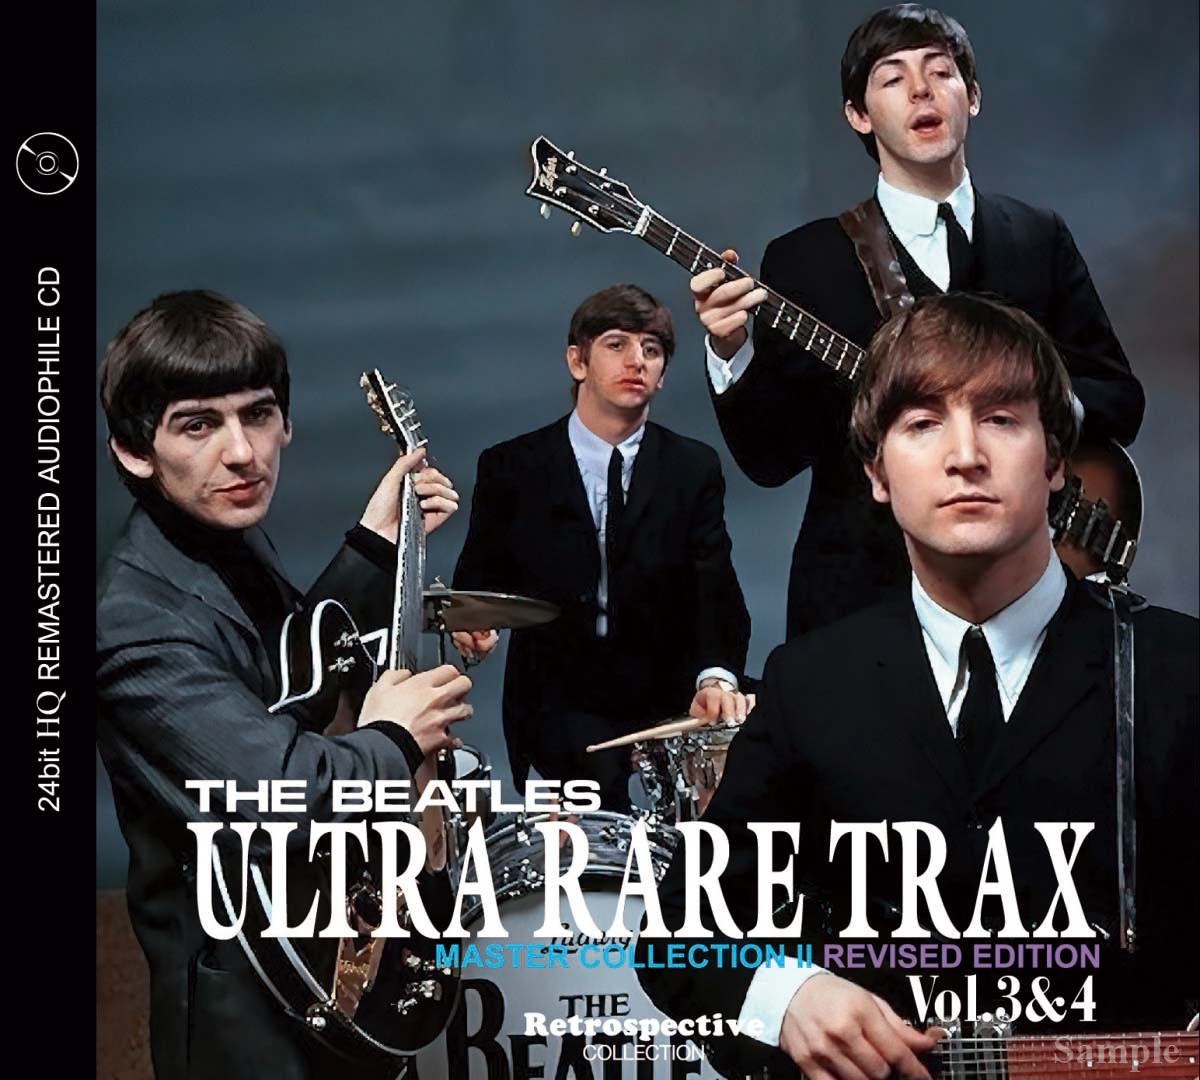 THE BEATLES / ULTRA RARE TRAX - MASTER COLLECTION Ⅱ:VOL.3&4 (RIVISED EDITION) 24bit HQ REMASTERED RETROSPECTIVE Collection【1CD】_画像1